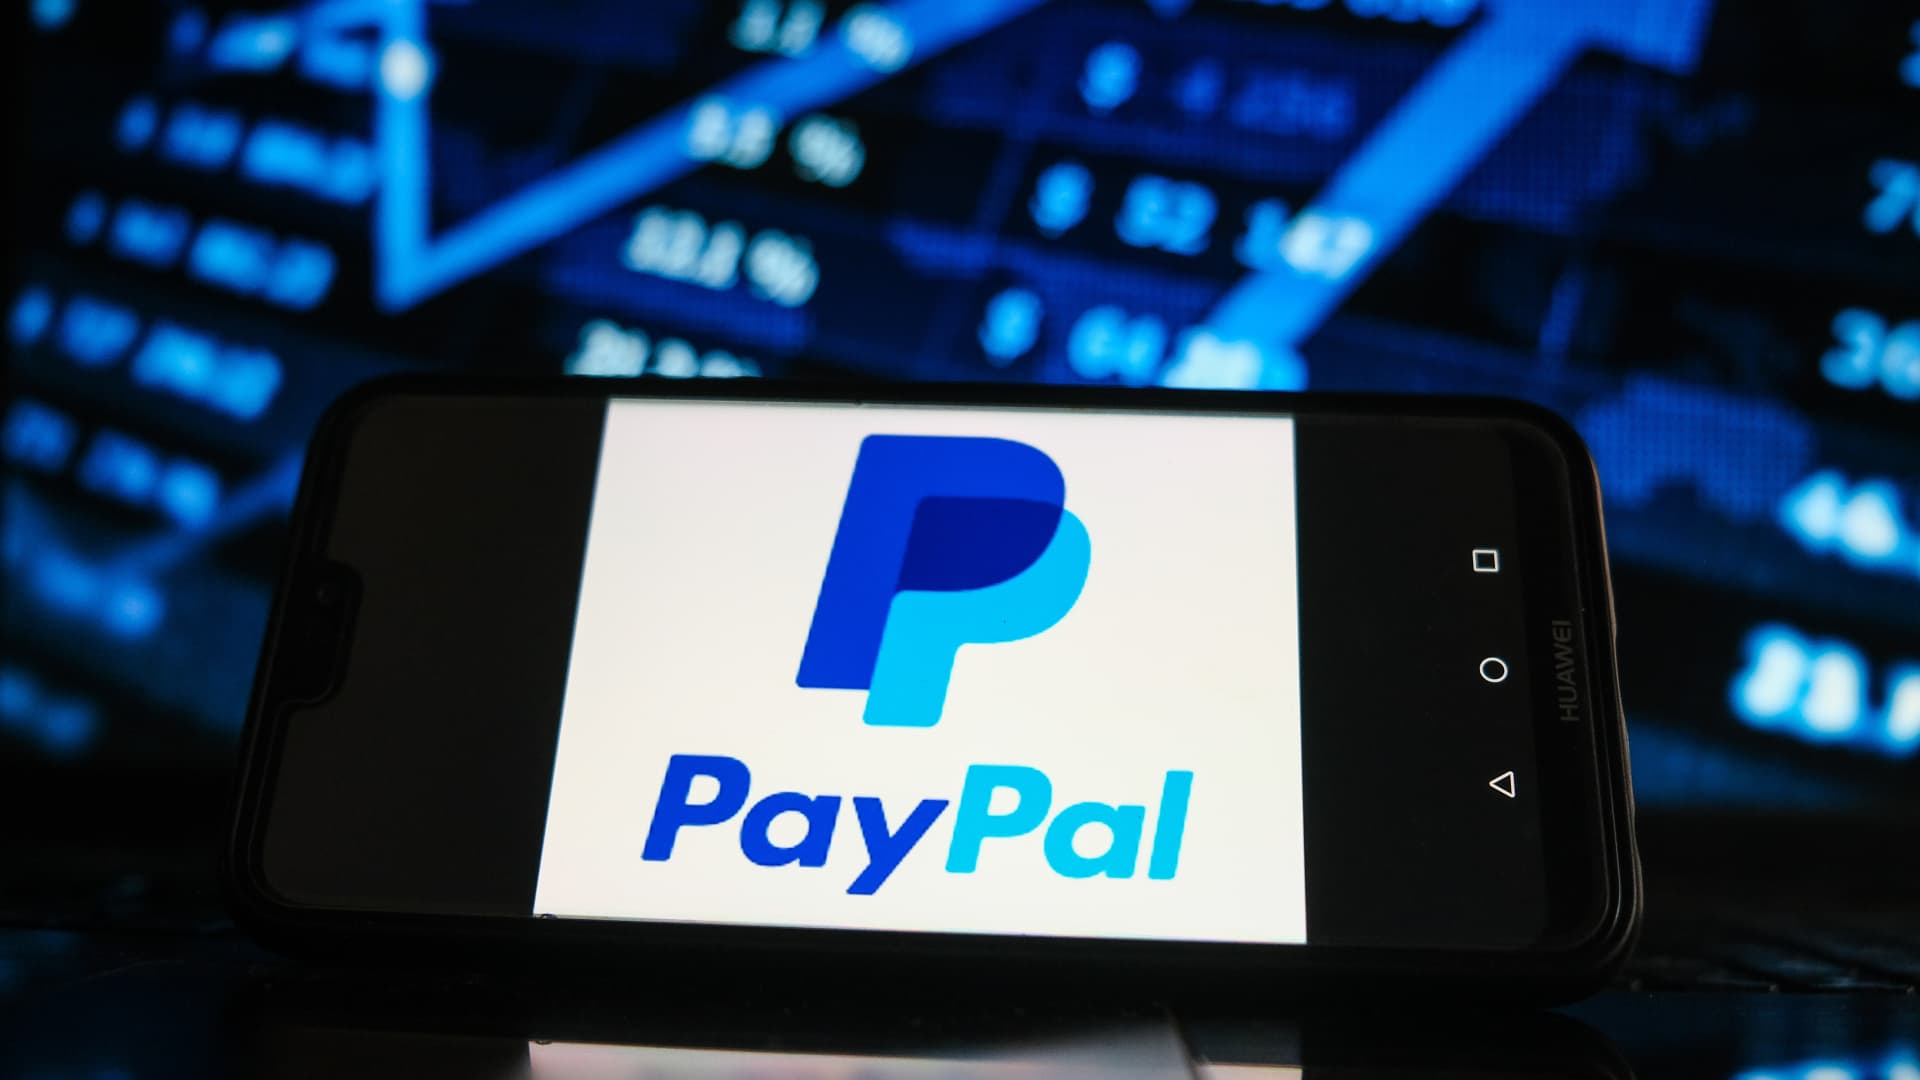 Paypal drops on light revenue forecast for Q4